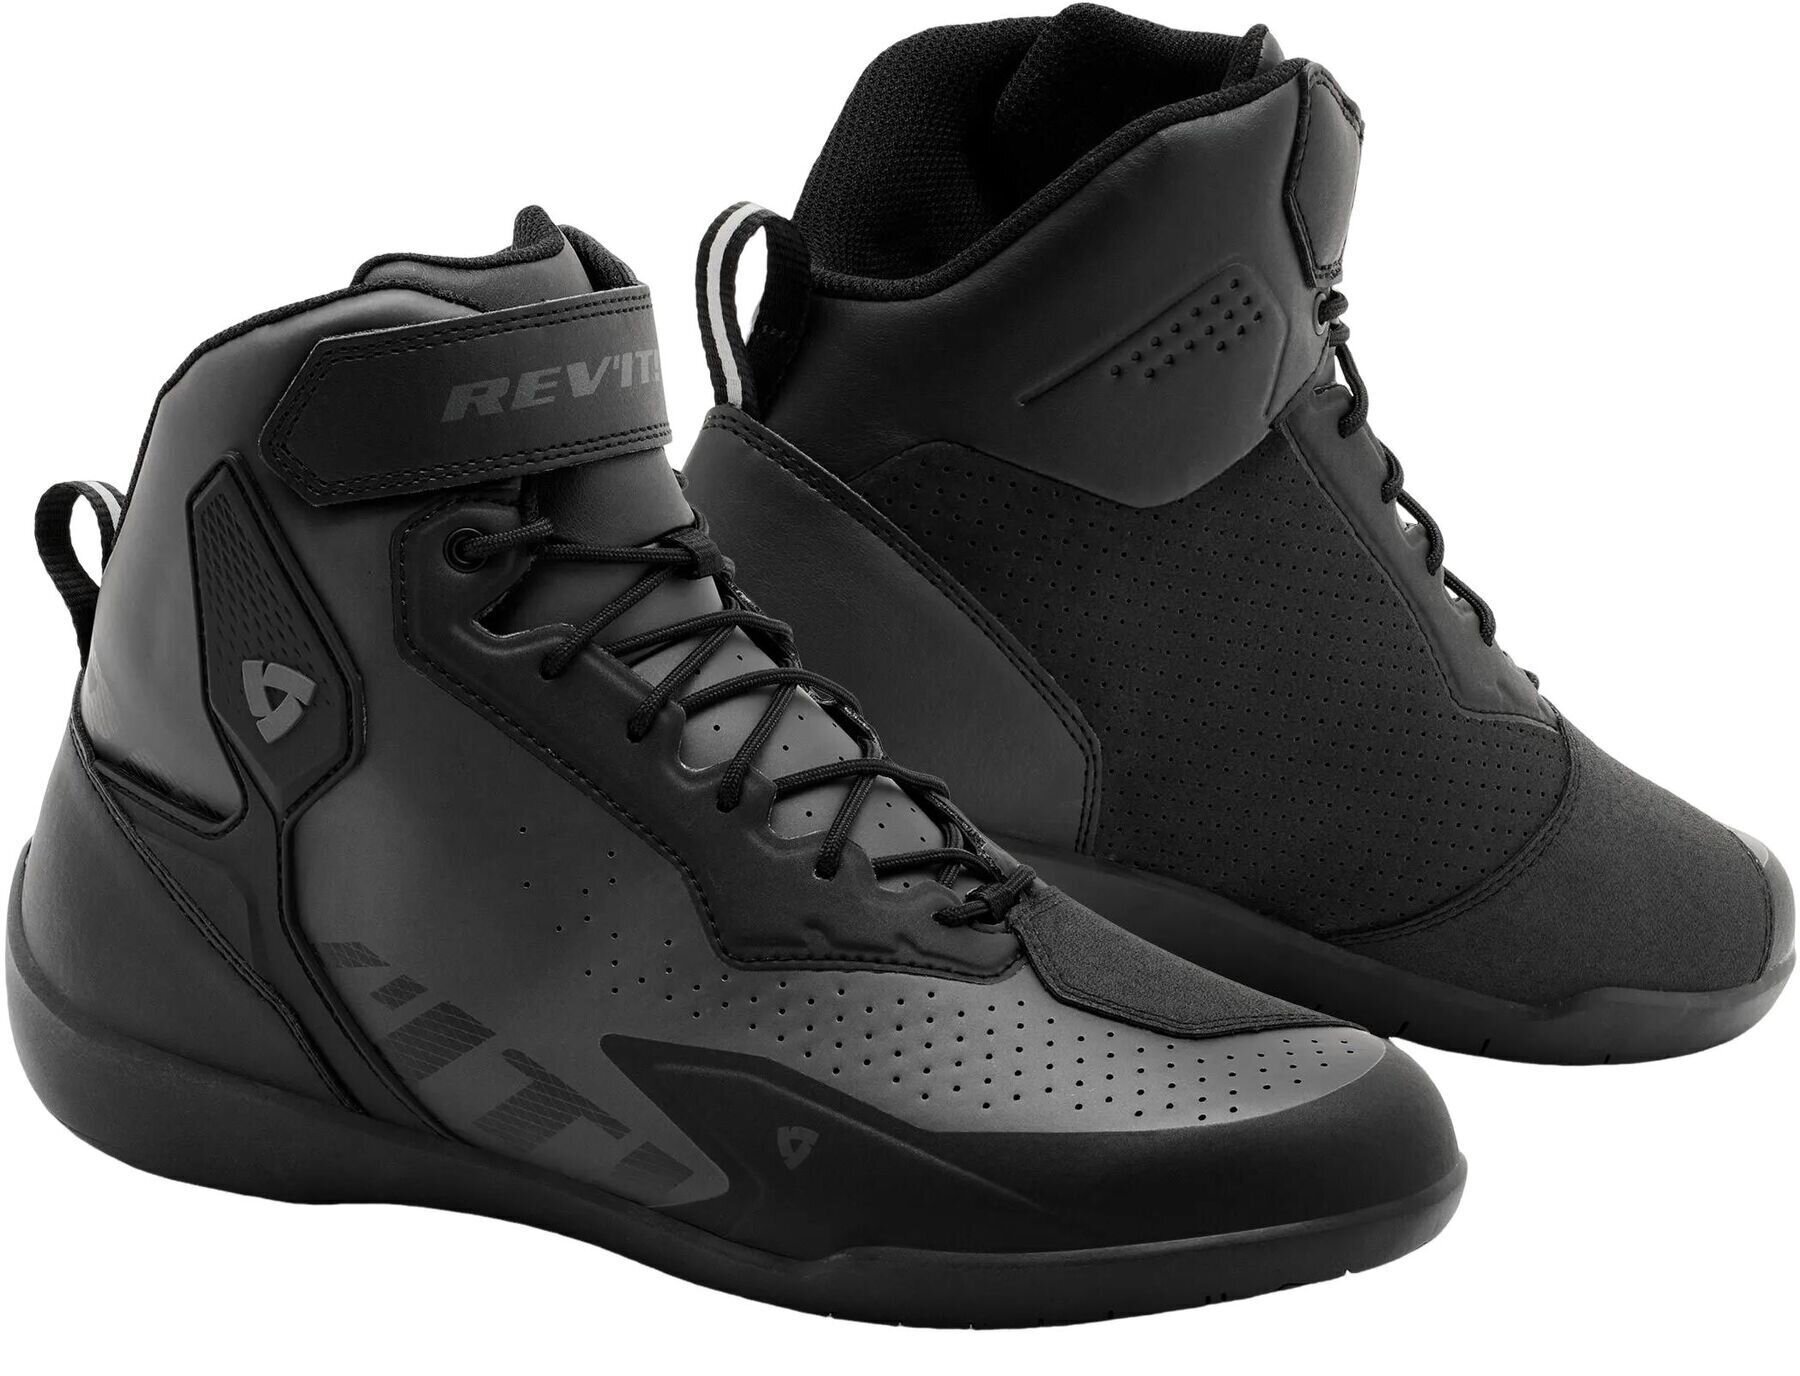 Boty Rev'it! Shoes G-Force 2 Black/Anthracite 46 Boty